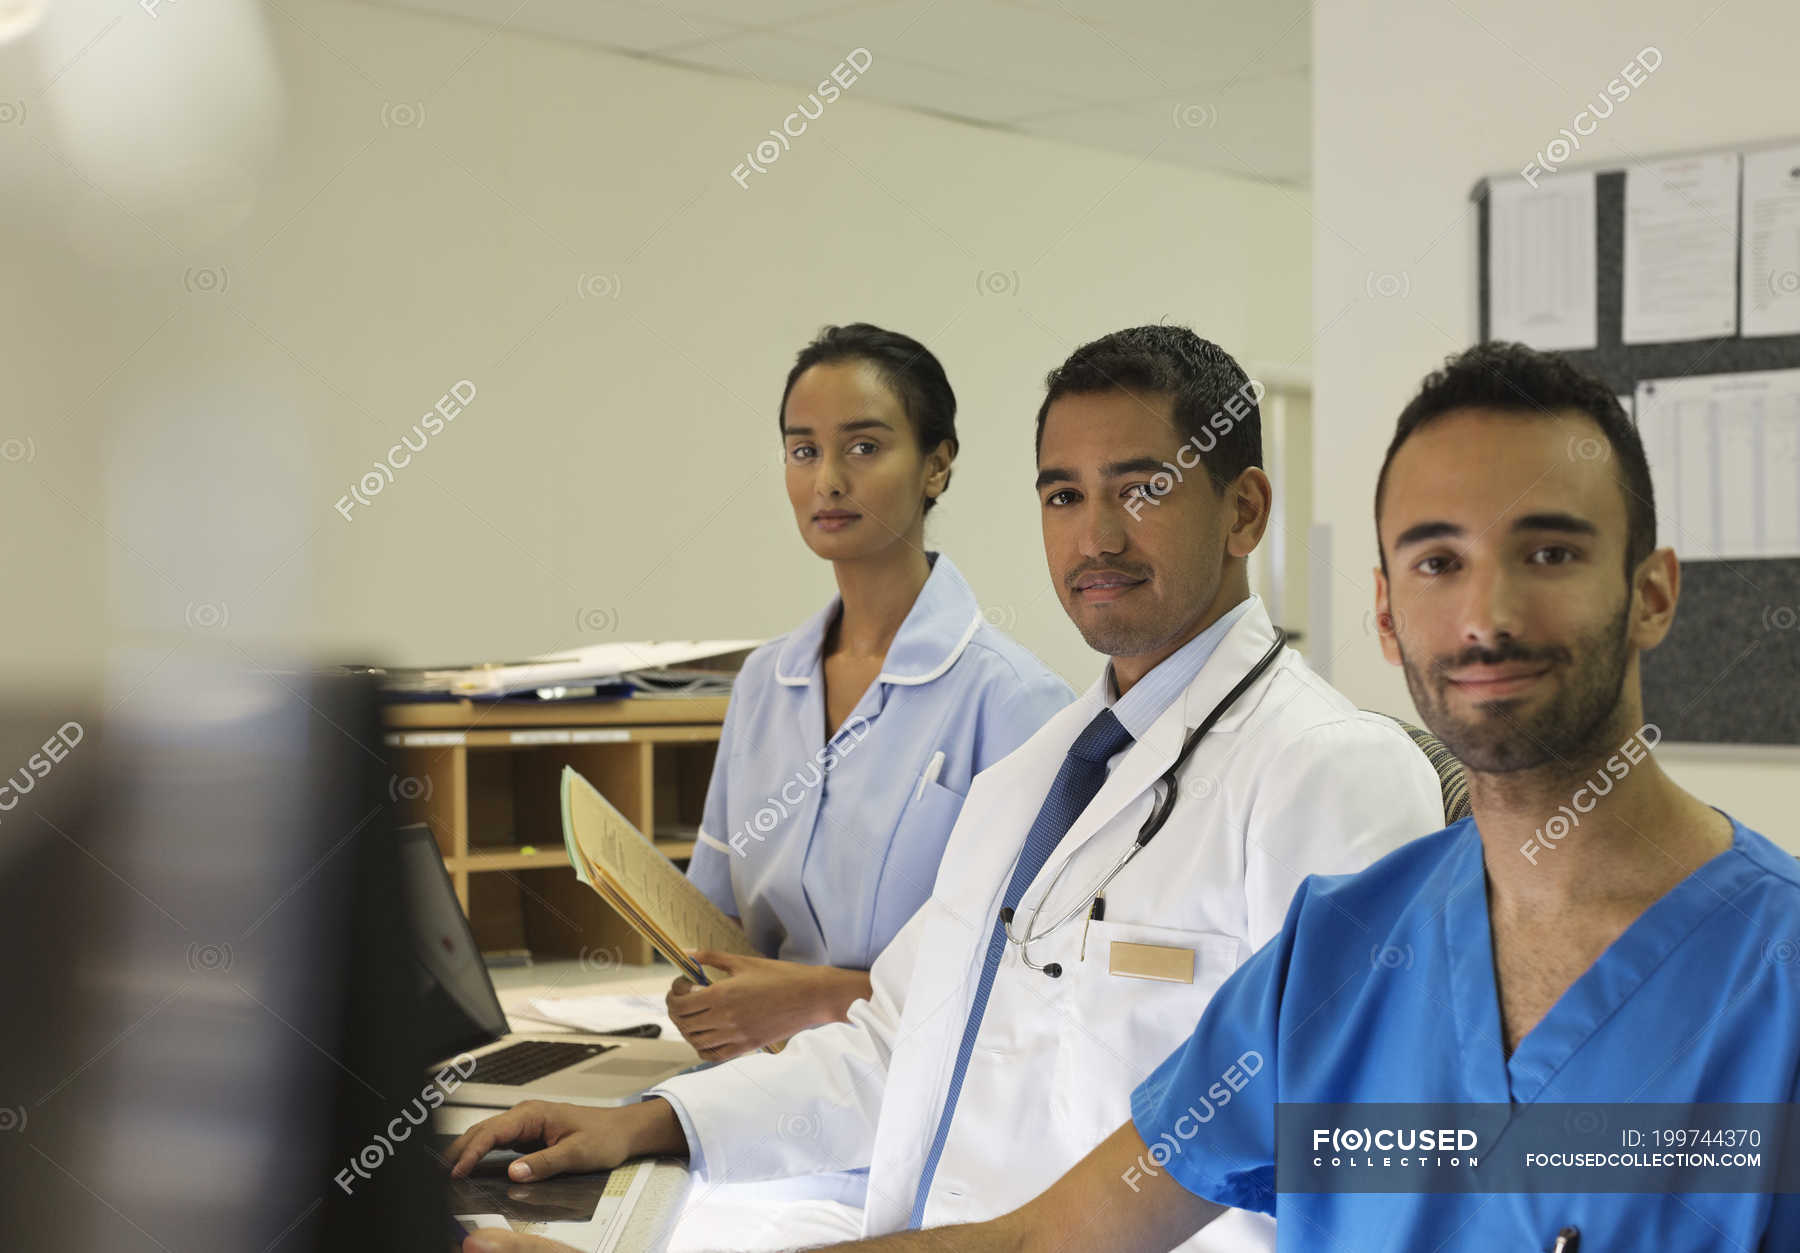 Hospital Staff Standing Behind Front Desk Caucasian Expertise